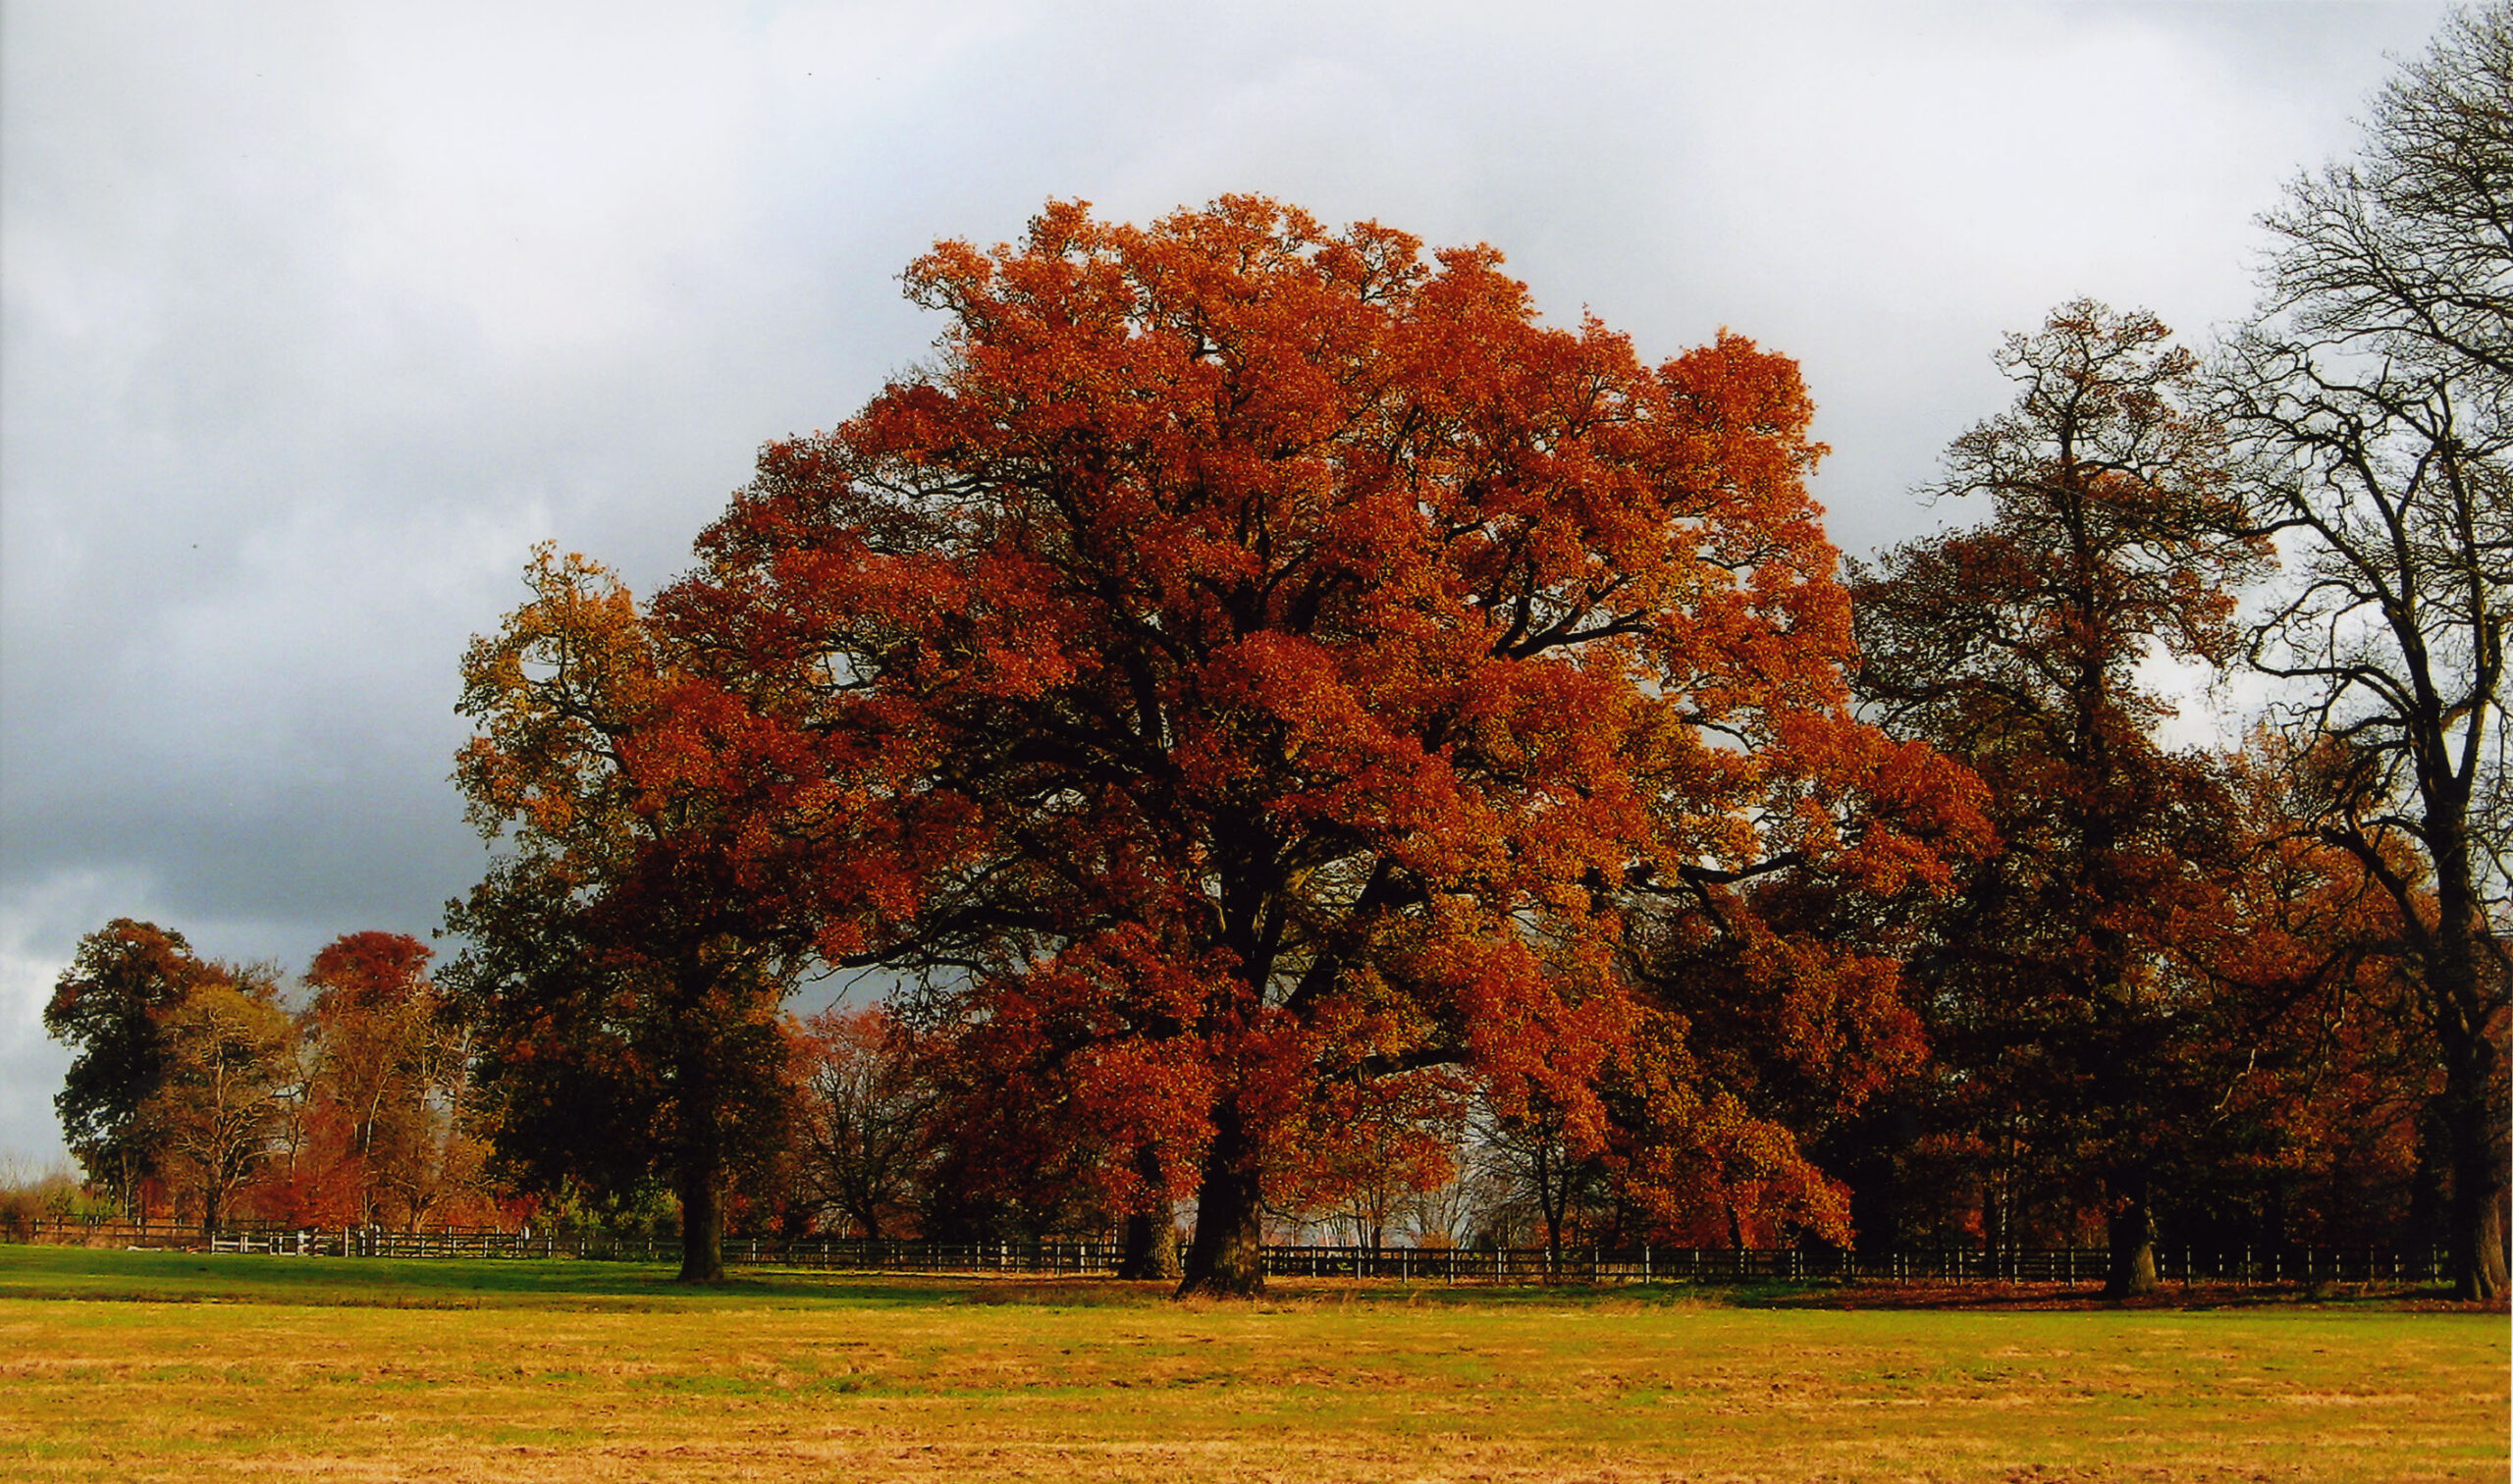 Autumn oak tree with red leaves